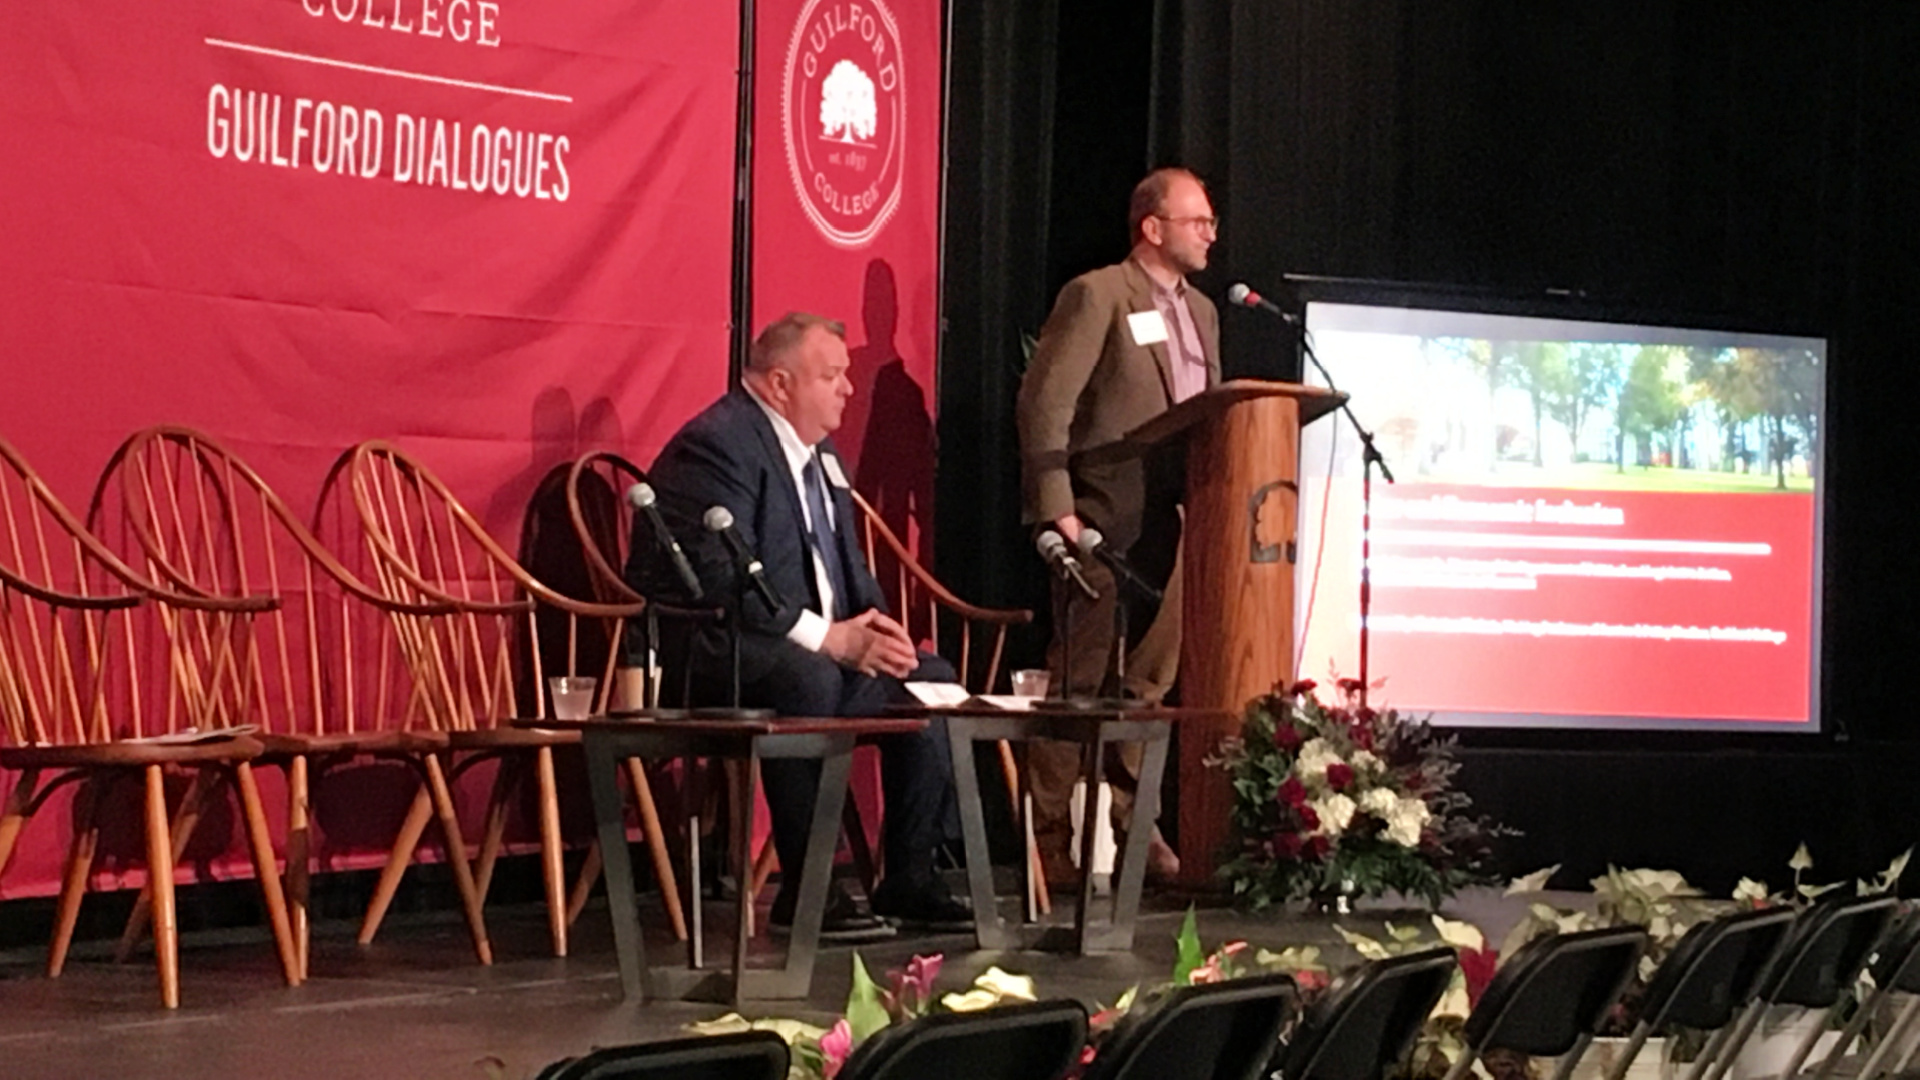 On stage during the Guilford Dialogues, from left: James Donovan and Christian Matheis.